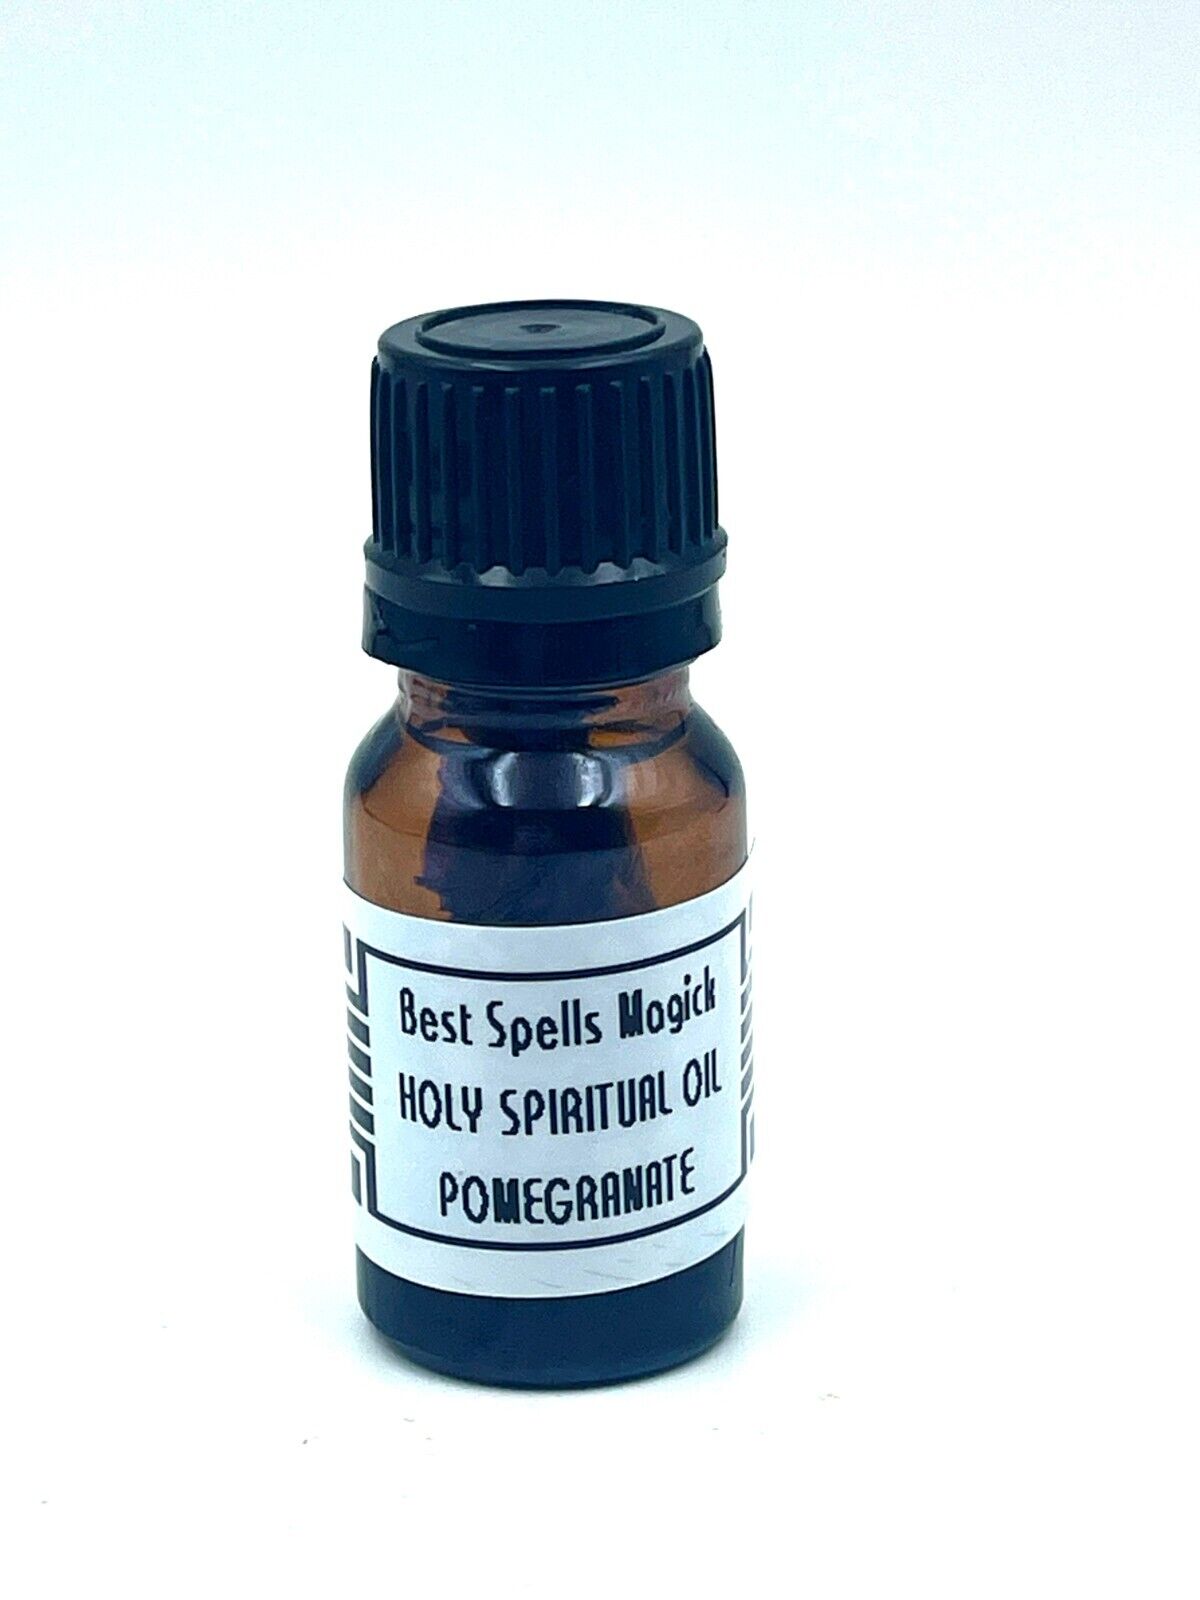 POMEGRANATE HOLY Biblical Anointing Oil / Emotional Well-Being, Beauty/ Magick